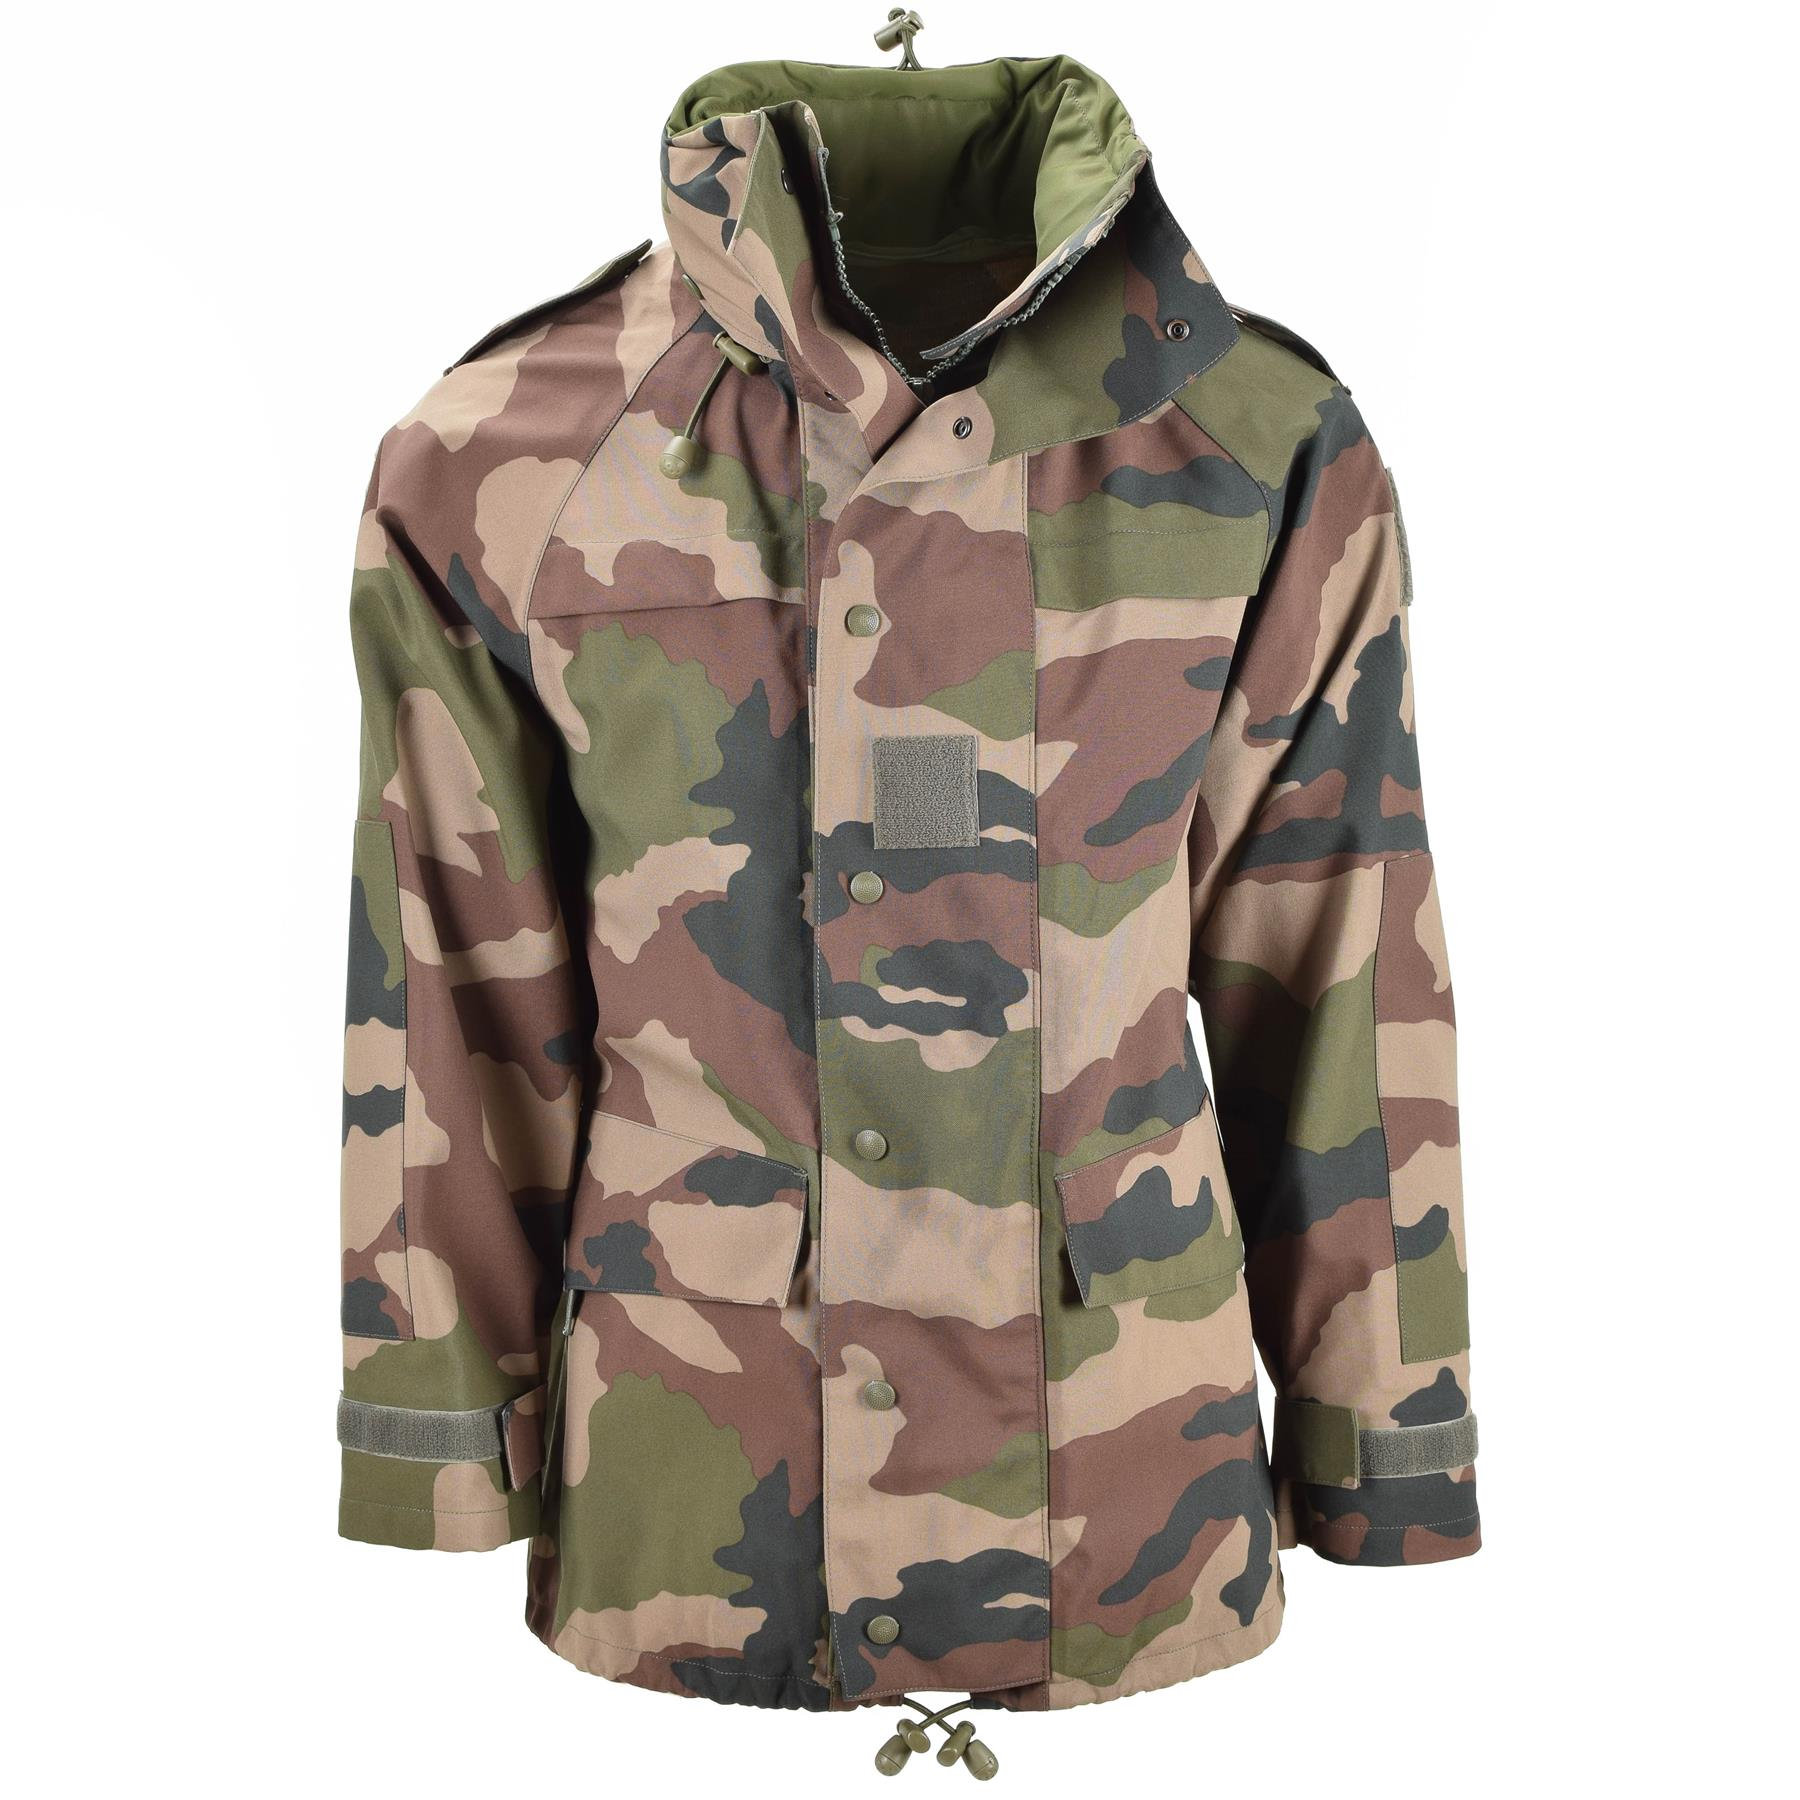 Genuine French Army Issue Waterproof Gore-Tex CCE Camouflage Rain Jacket 